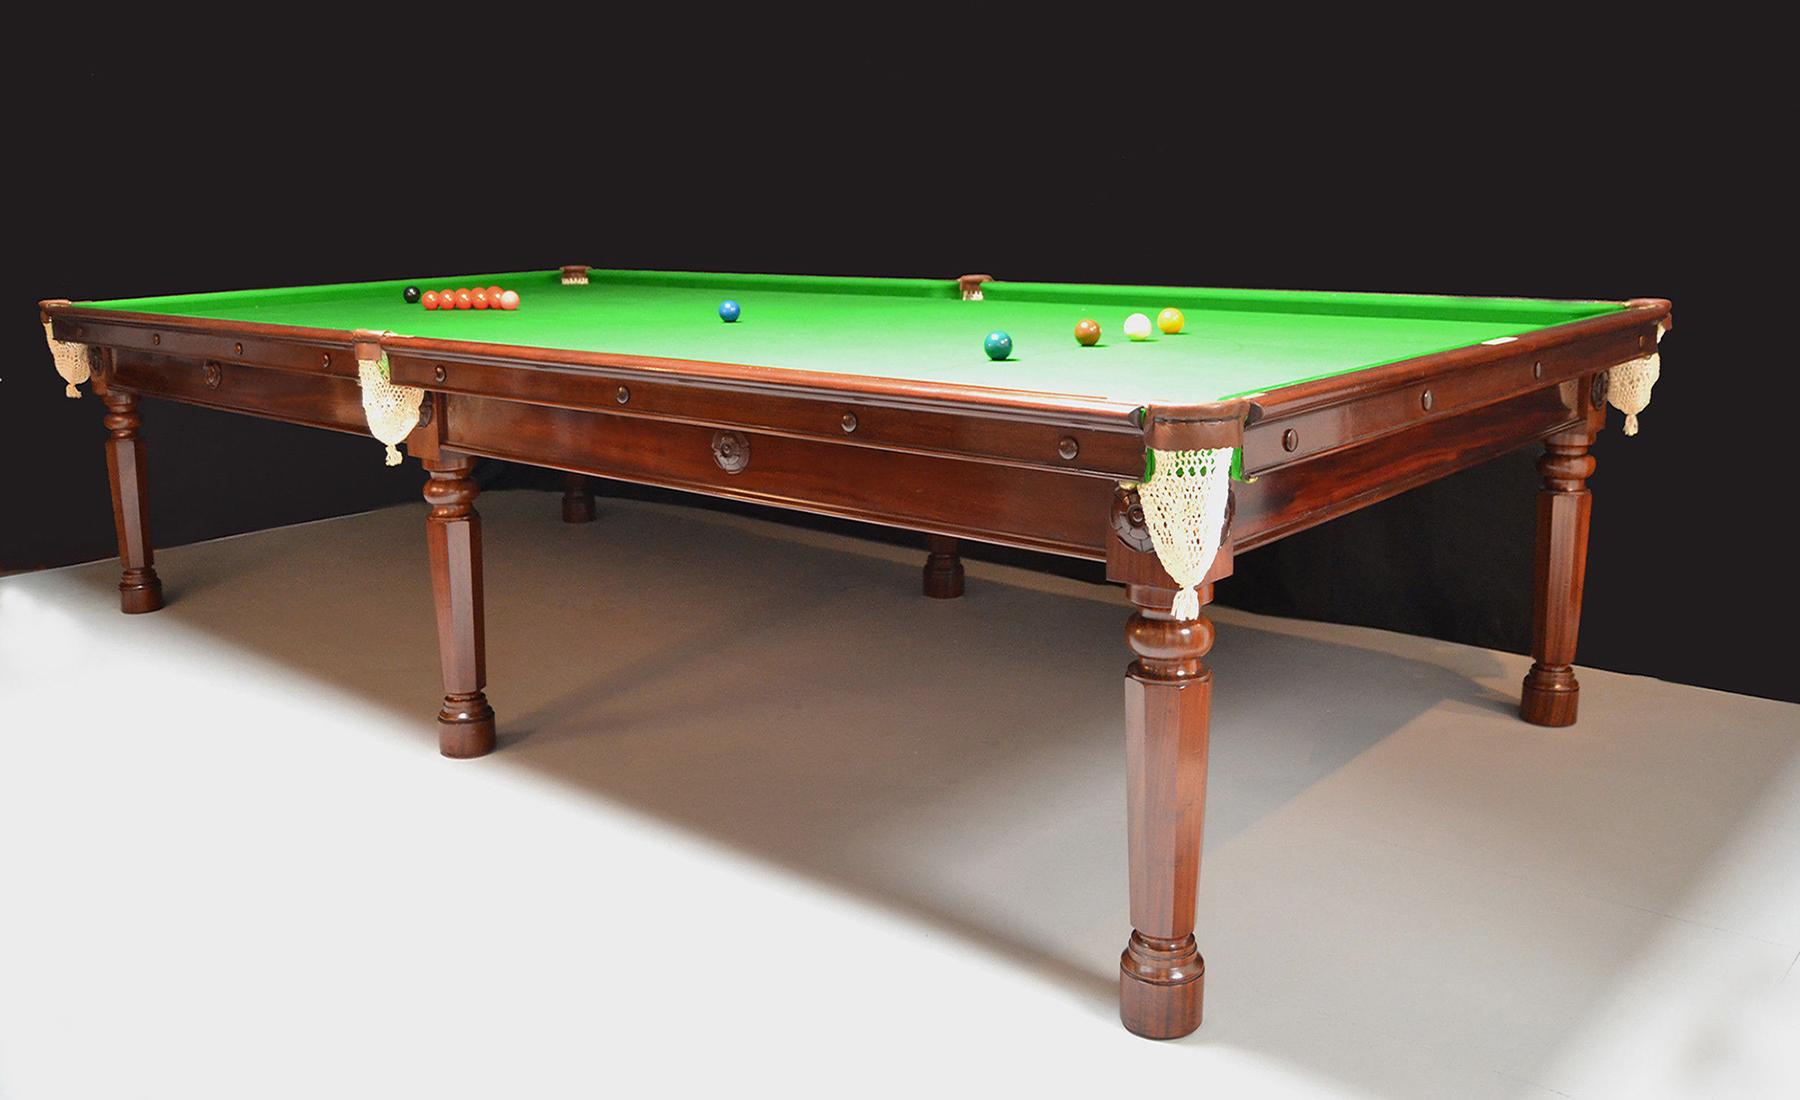 A 12ft x 6ft  outstanding original Gillows antique billiard table, this table is the epitome of understated elegance, standing on six finely tuned octagonal legs with beautifully carved Tudor Rose Patrae to the frame and leg blocks.

We believe this